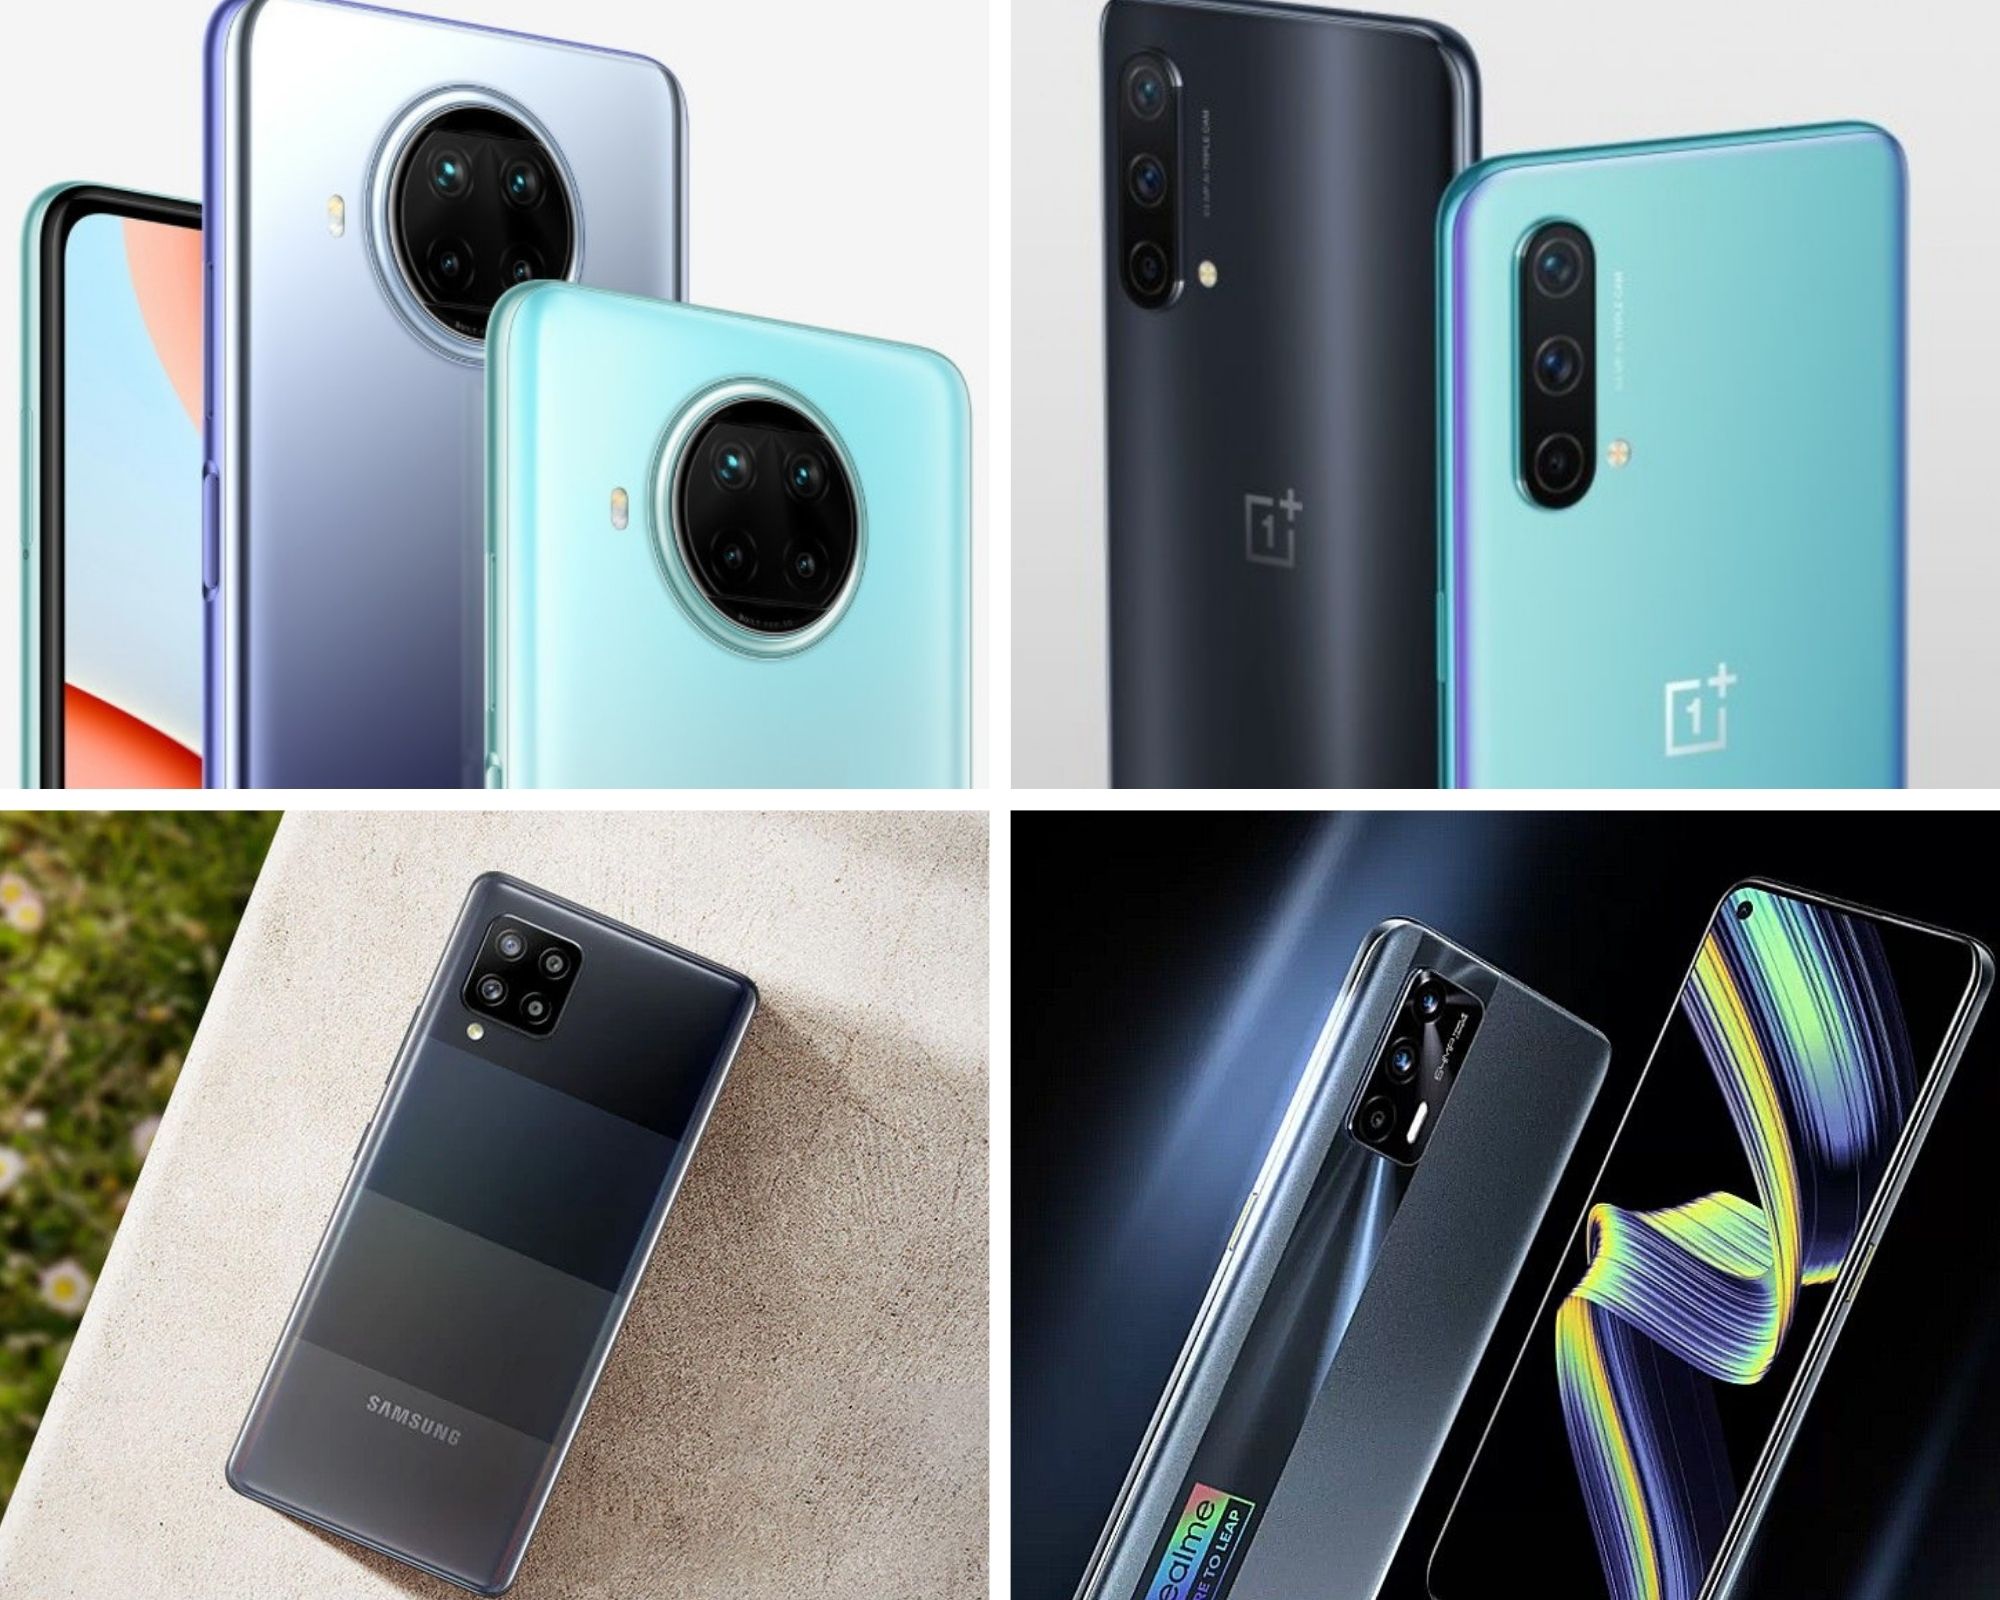 OnePlus Nord CE 5G Vs Realme X7 Max 5G Vs Mi 10i Vs Samsung Galaxy M42 5G: Price, Variants, Specifications Compared